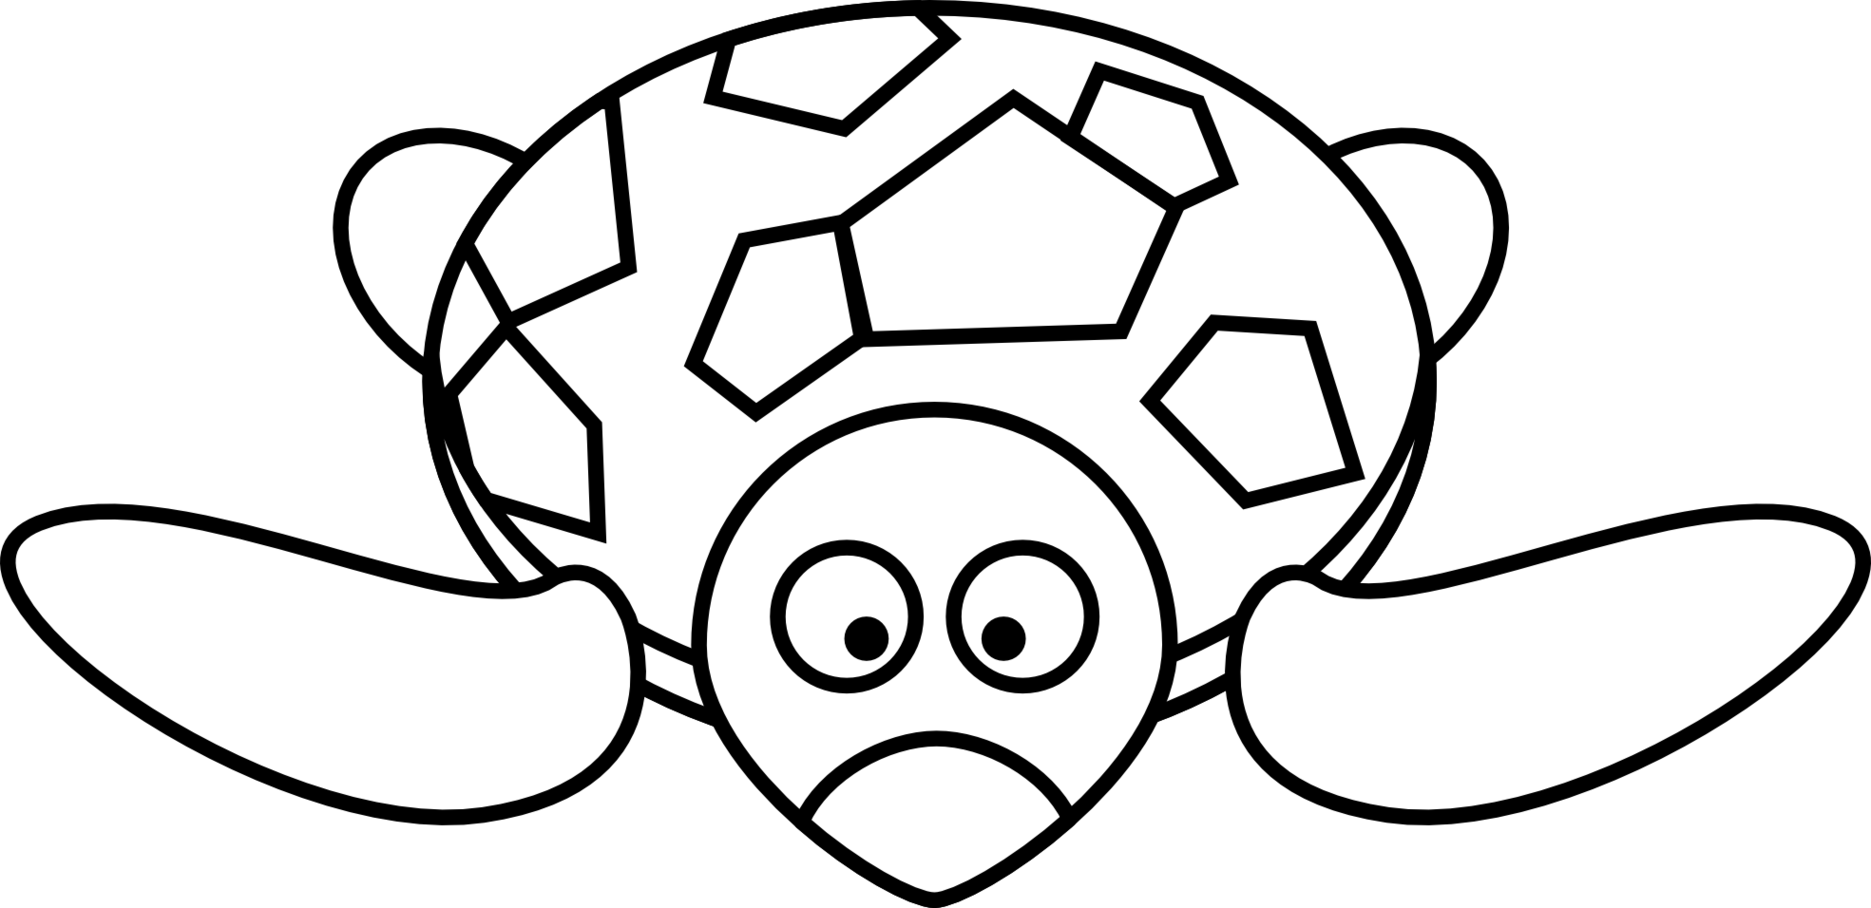 Sea Turtle Black And White Clipart - Free to use Clip Art Resource